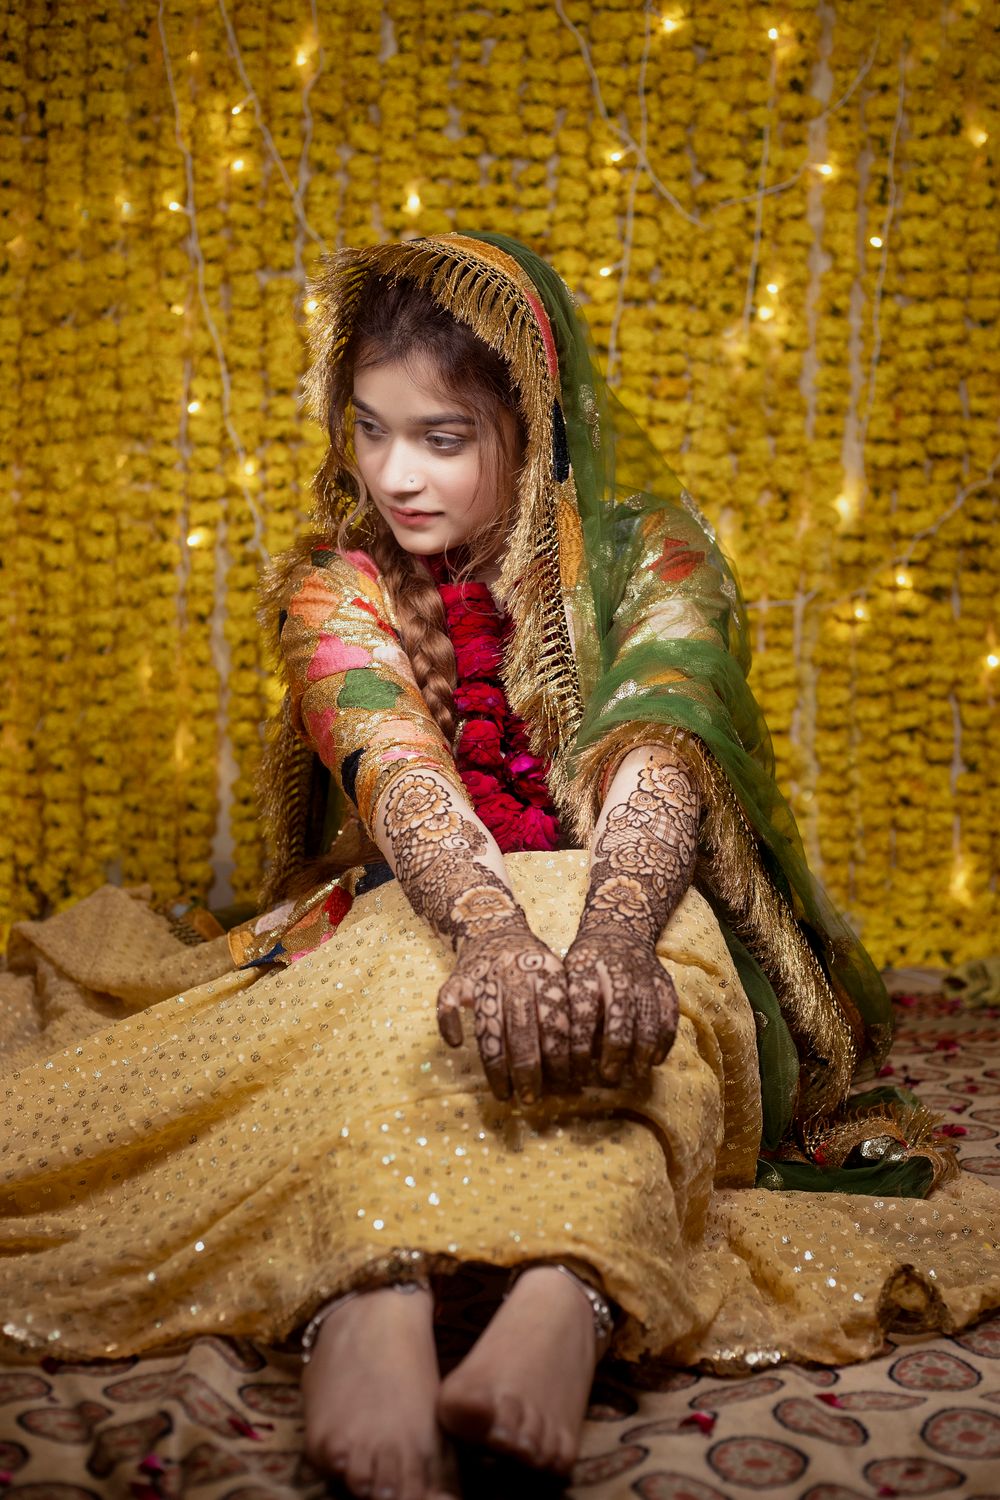 Photo From Aiman + Altamash - By Dilshan Photography